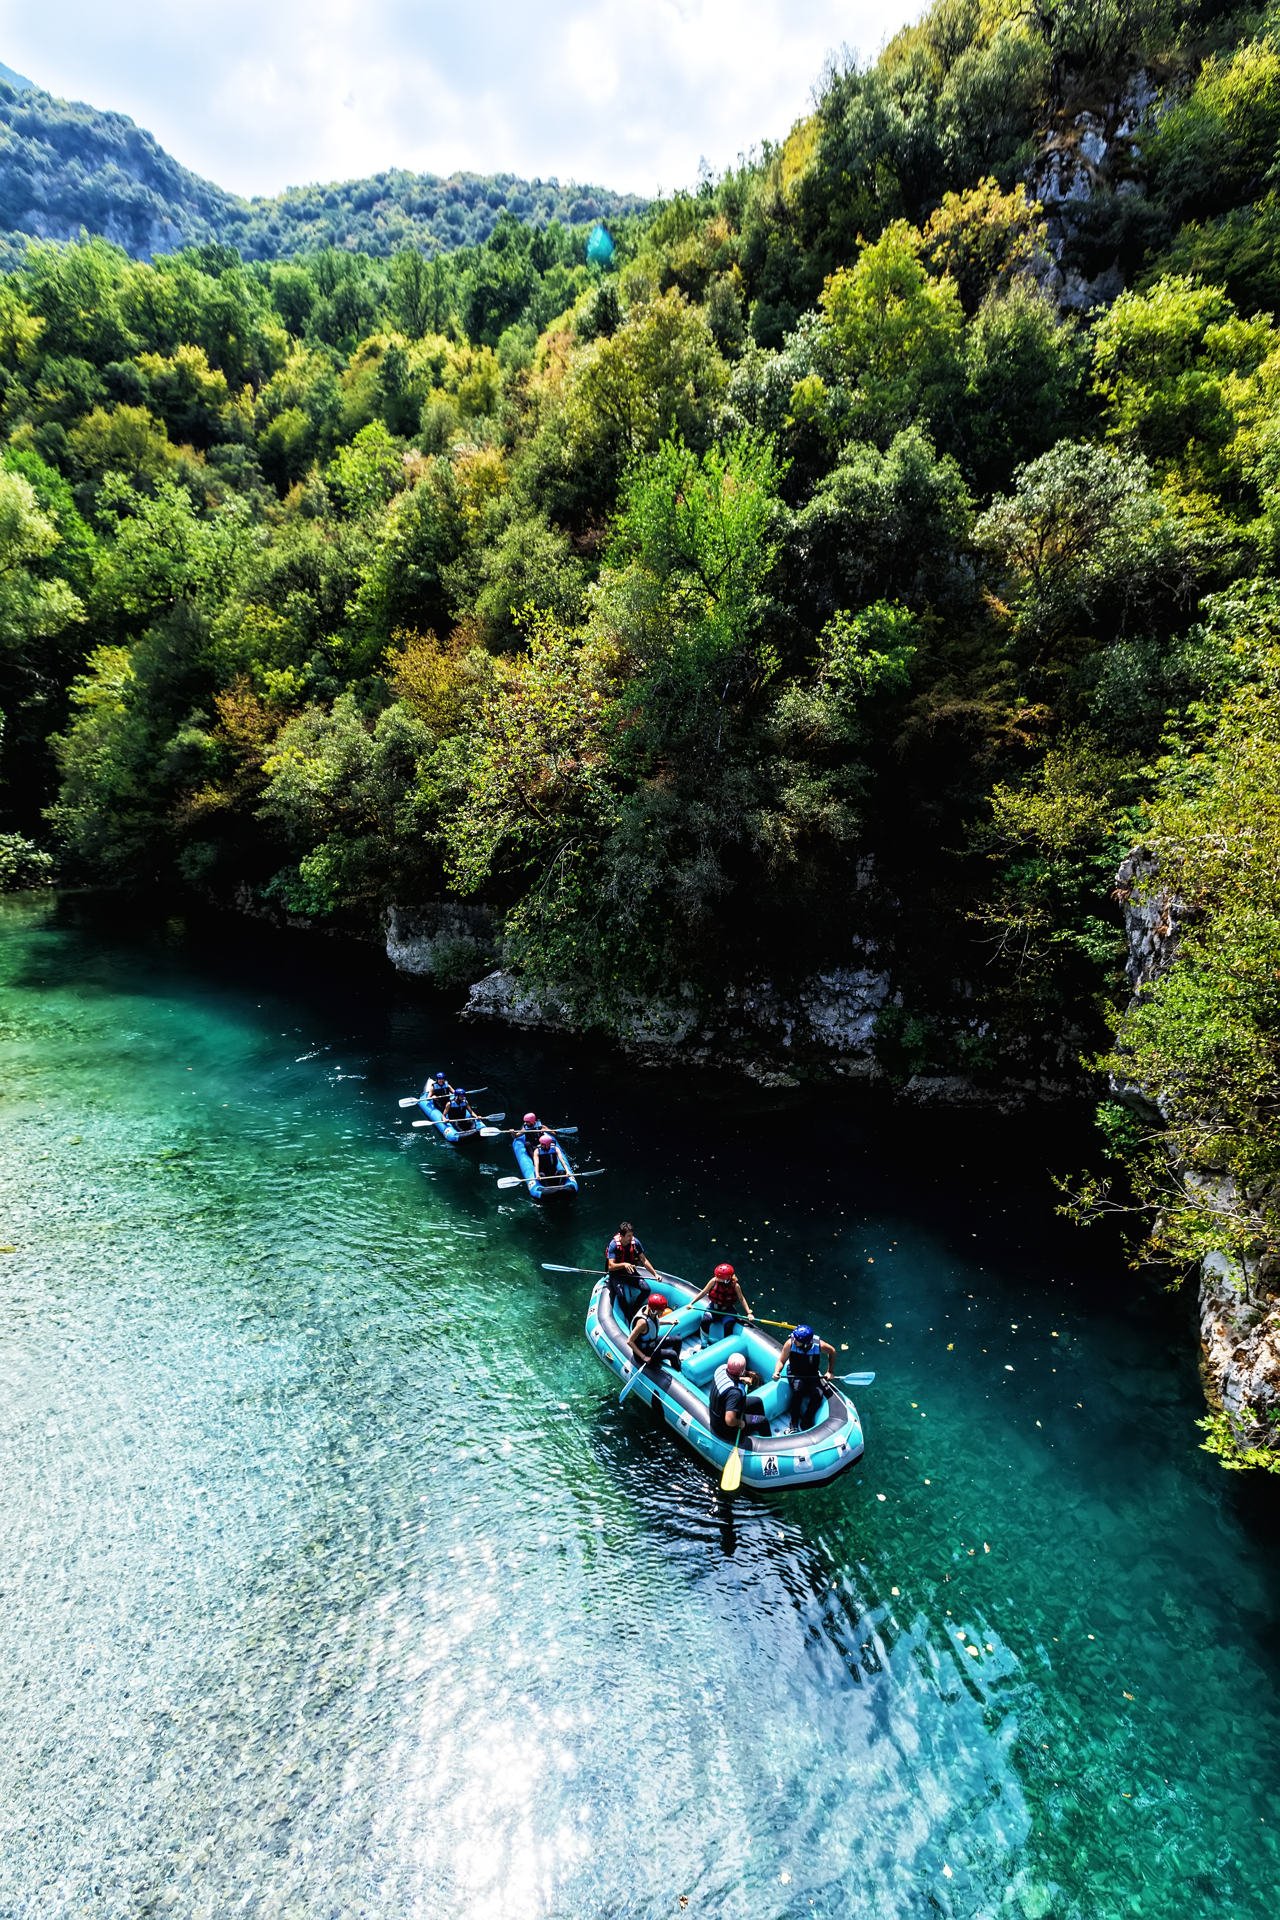 Adventure teams doing rafting on the cold waters of the Voidomatis River in Zagori. Voidomatis river is one of the most popular among rafters in Greece